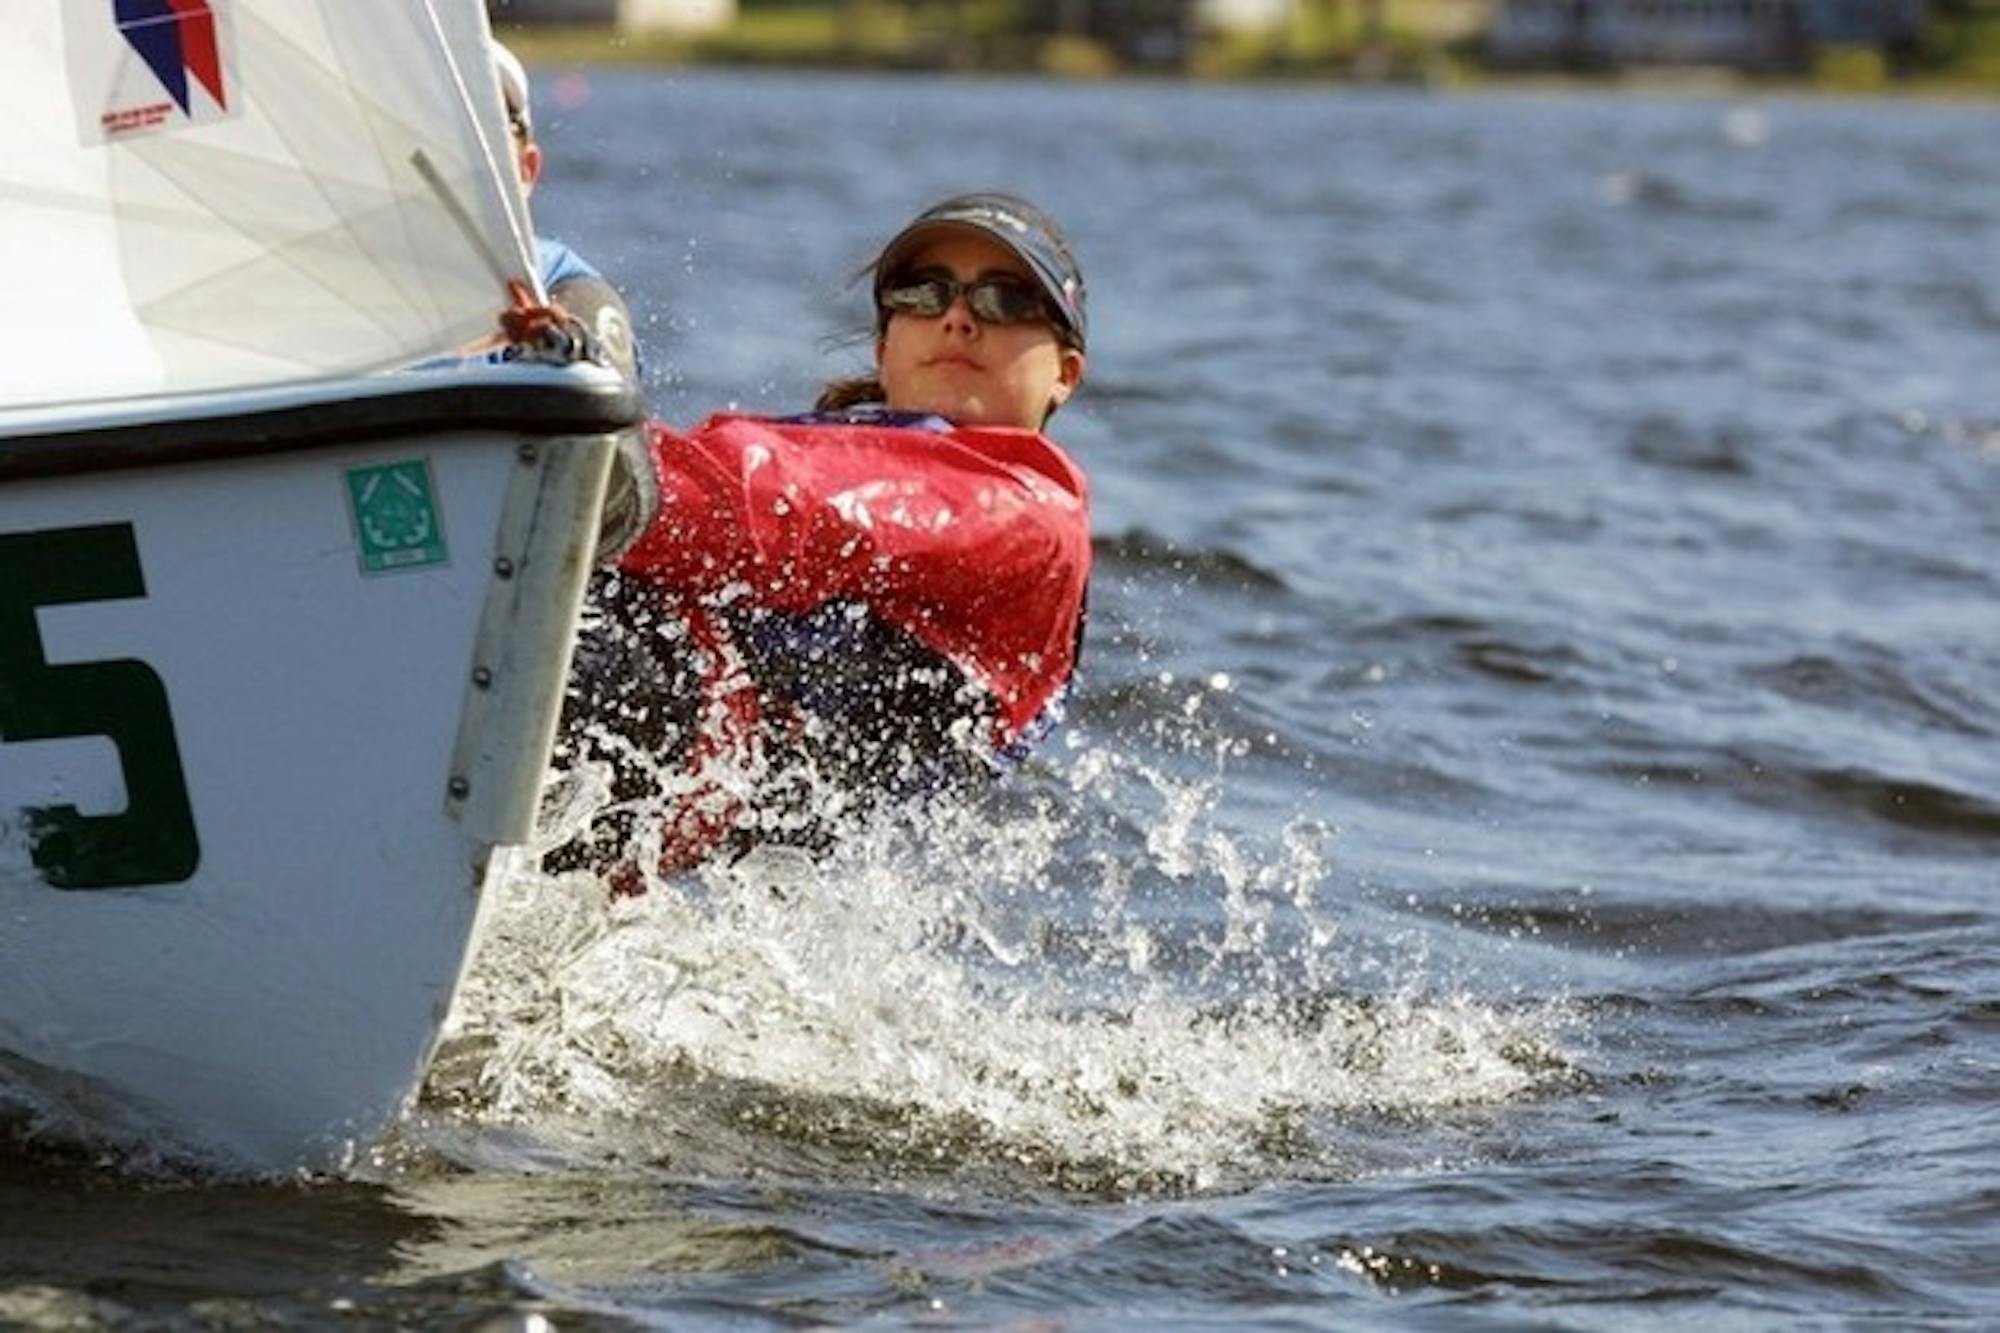 The coed sailing team put on an impressive show at the ACC championships, cruising to a wide margin of victory.